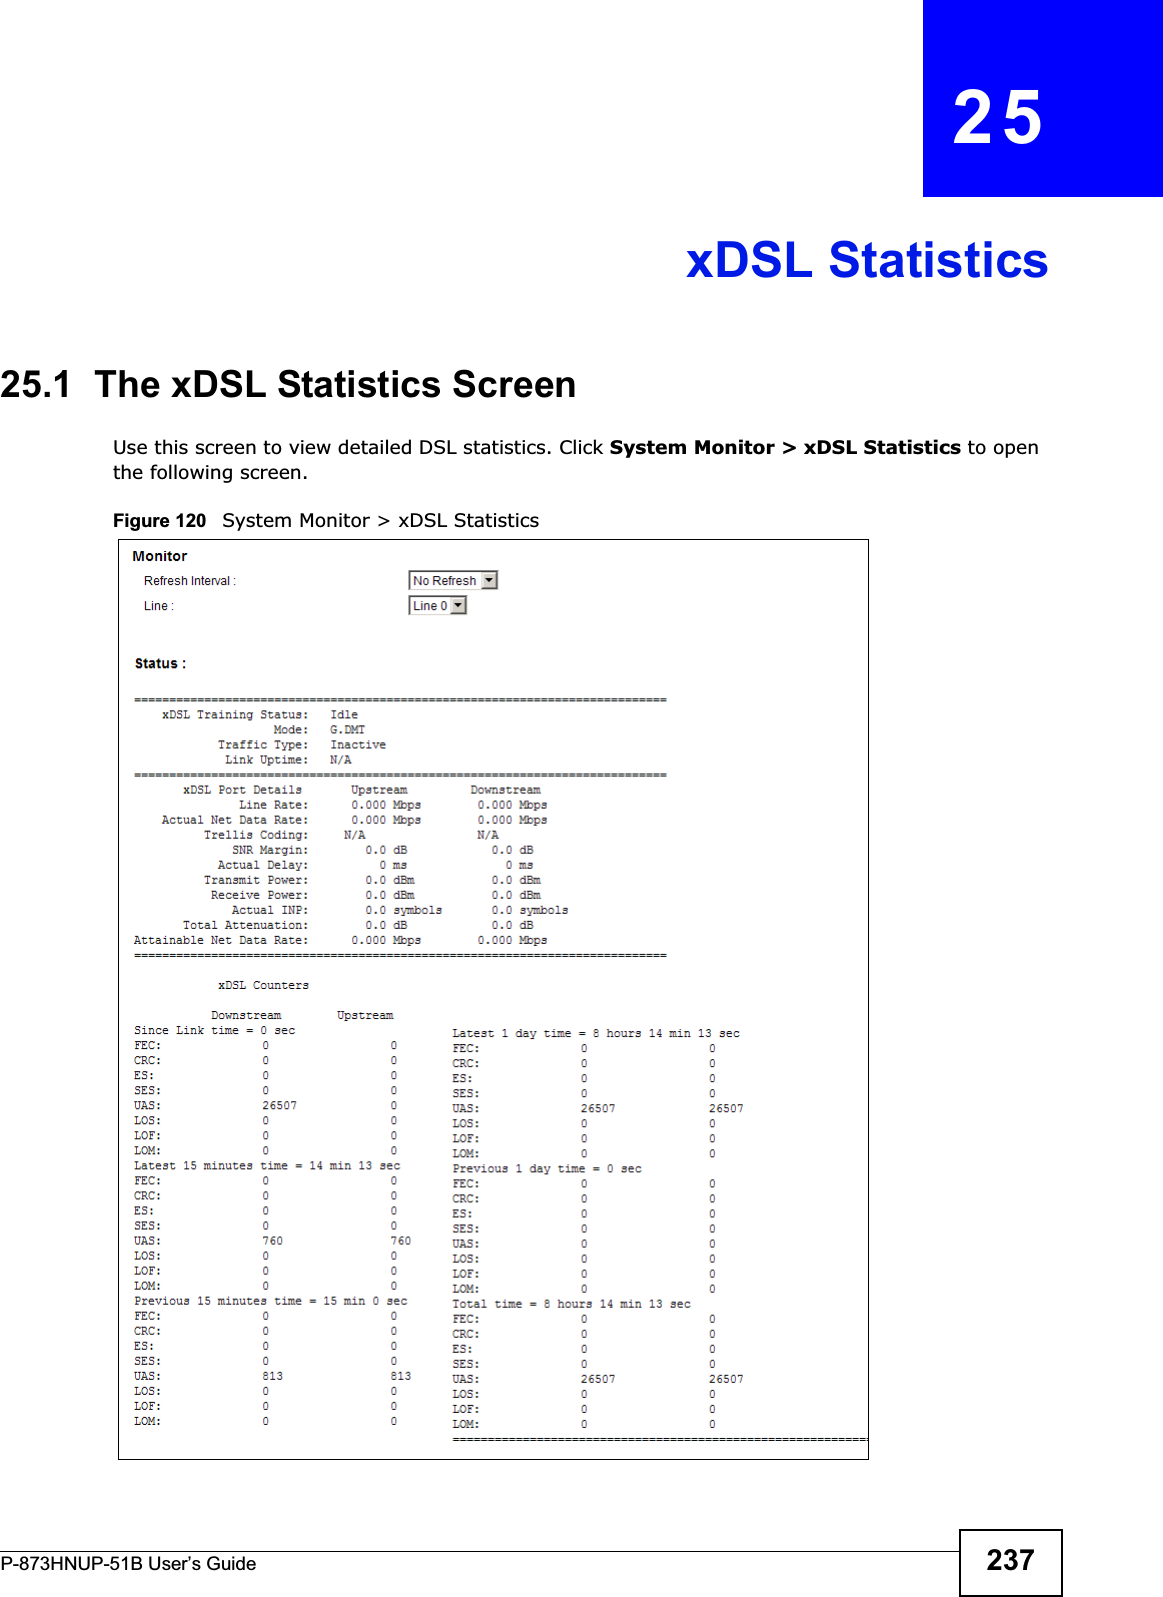 P-873HNUP-51B User’s Guide 237CHAPTER   25xDSL Statistics25.1  The xDSL Statistics ScreenUse this screen to view detailed DSL statistics. Click System Monitor &gt; xDSL Statistics to open the following screen.Figure 120   System Monitor &gt; xDSL Statistics